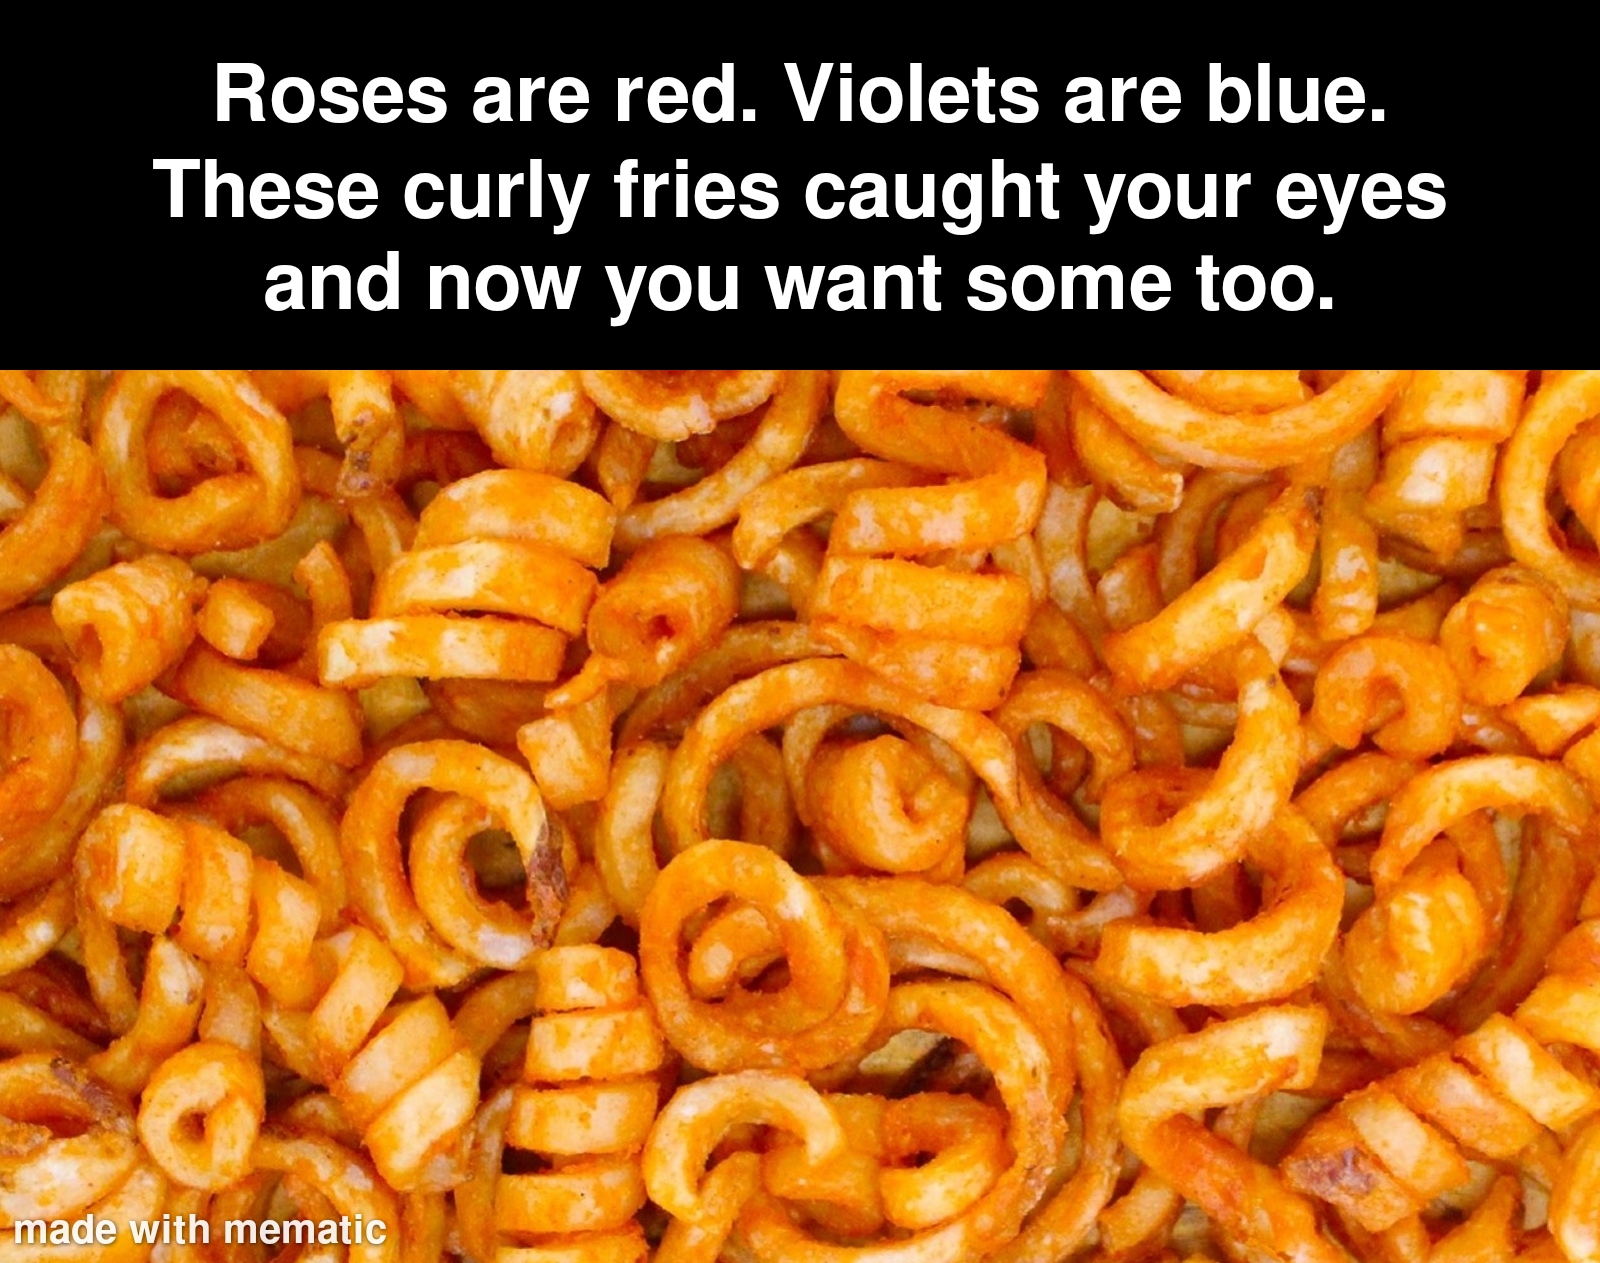 arbys secret menue - Roses are red. Violets are blue. These curly fries caught your eyes and now you want some too. made with mematic